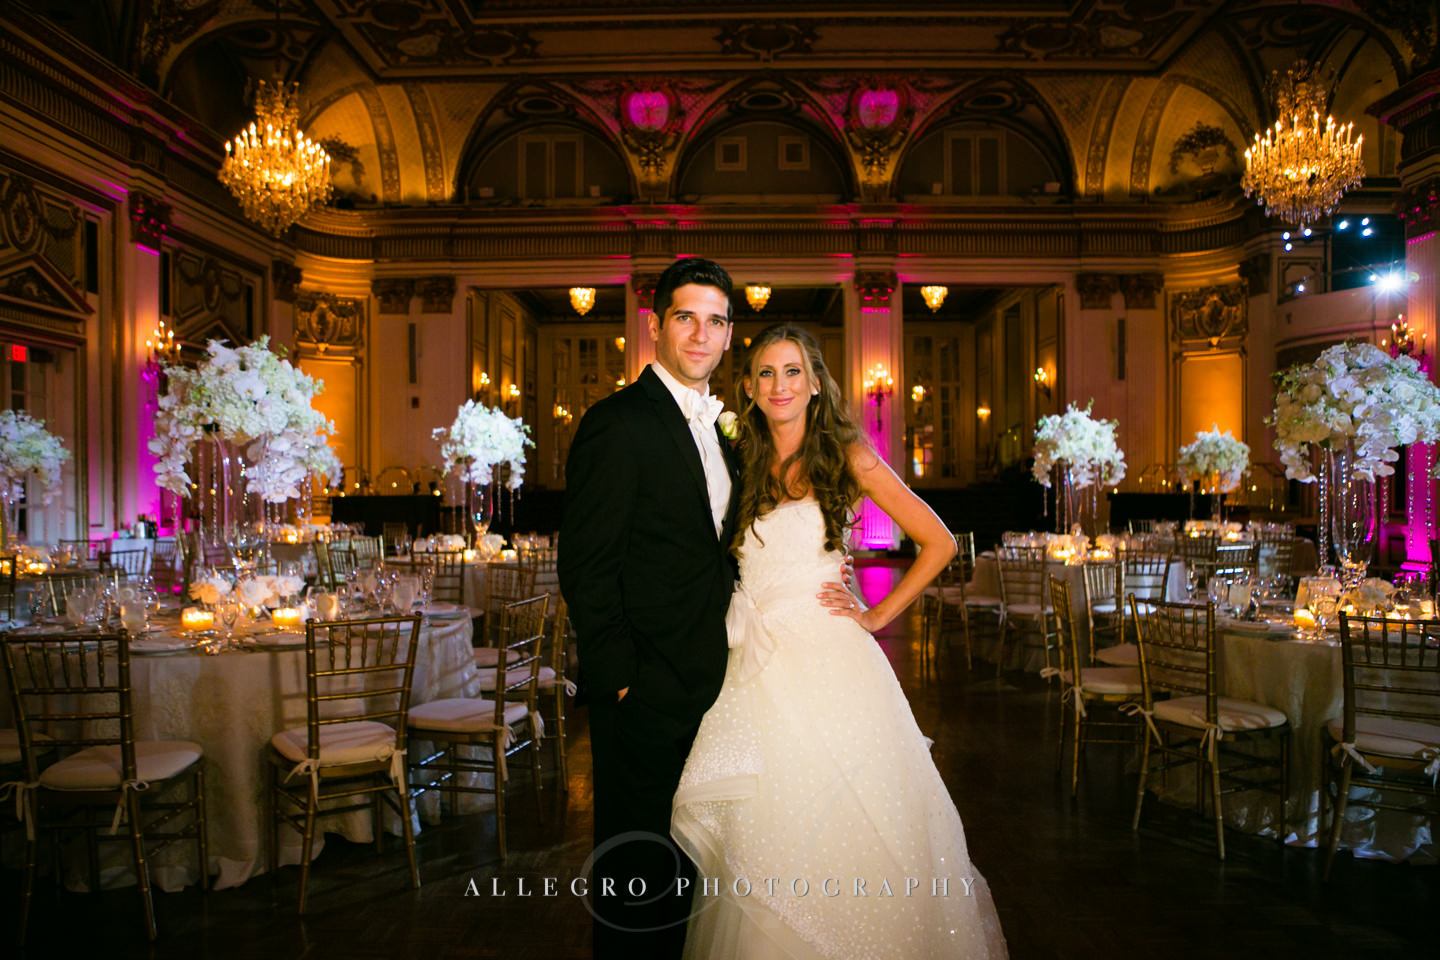 in their beautiful grand ballroom - fairmont copley plaza- - photo by allegro photography